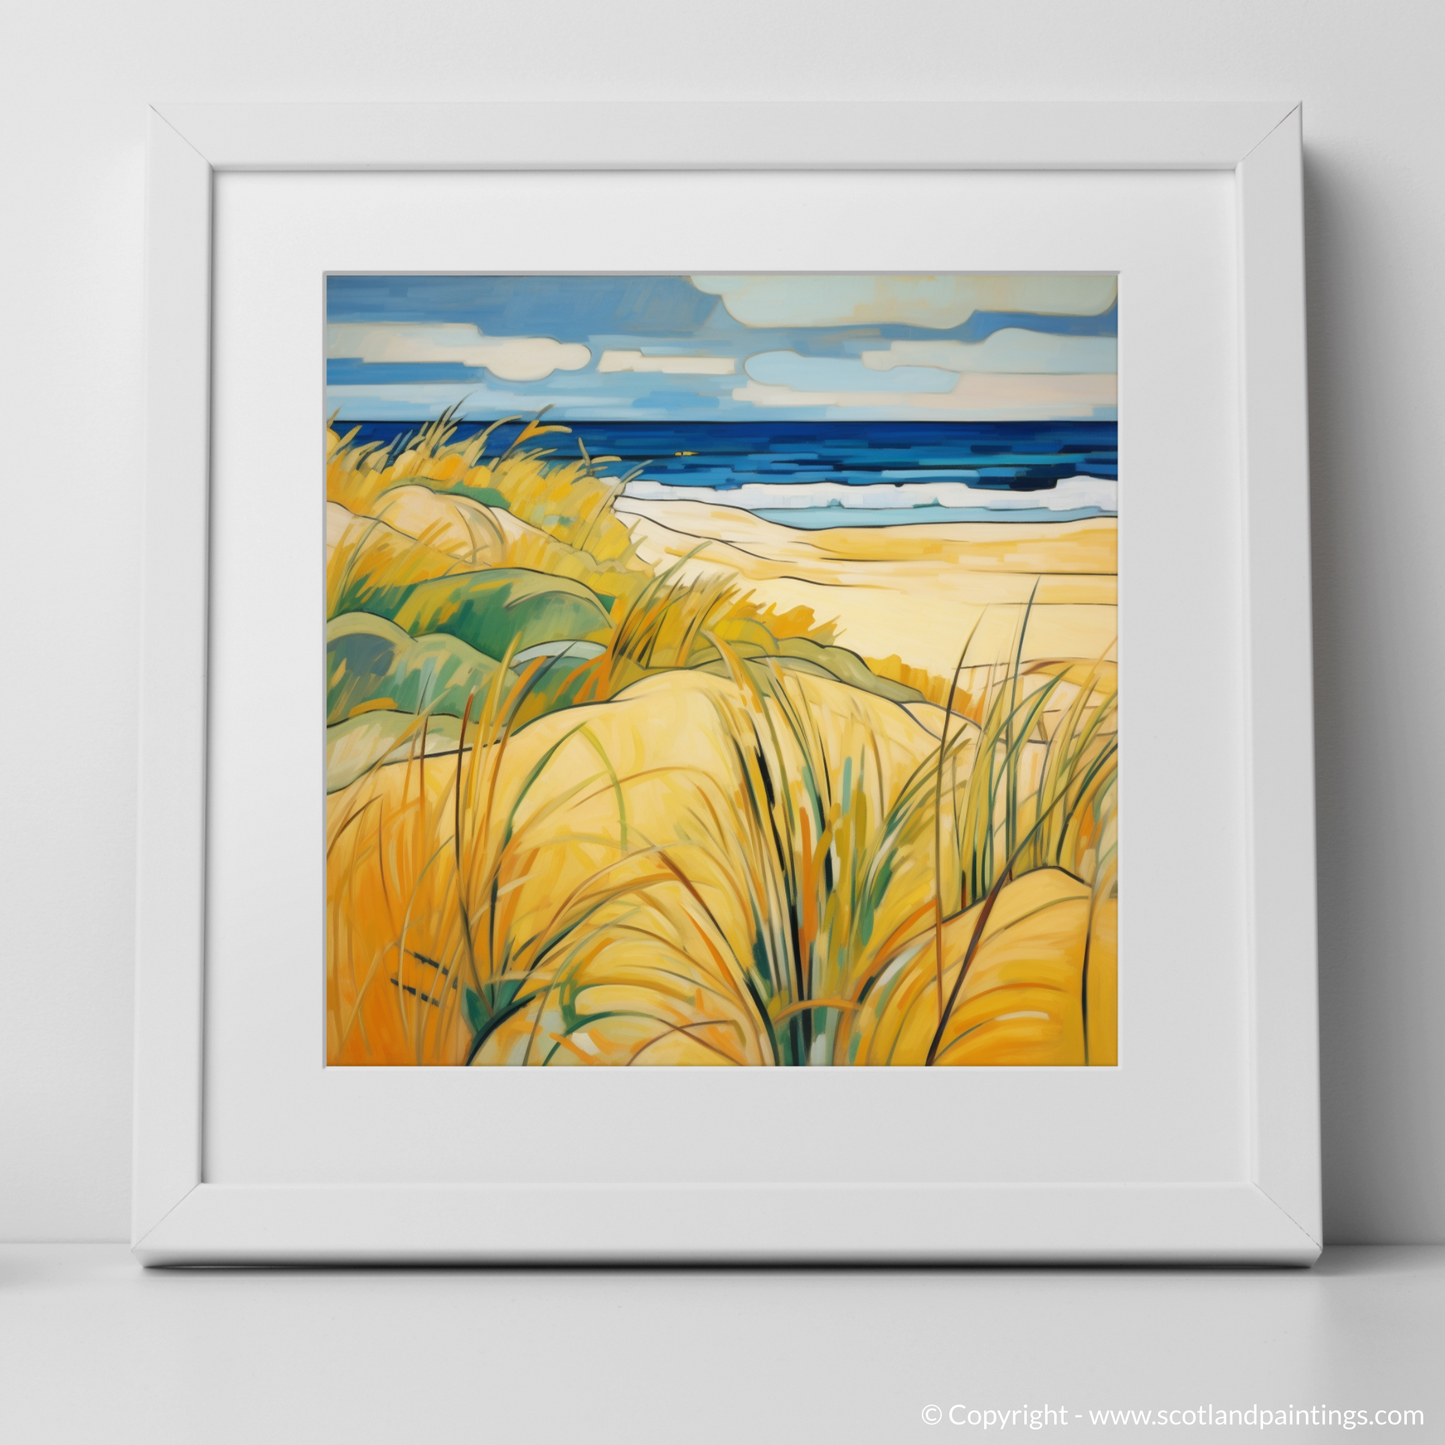 Cubist Ode to Lyme Grass at Nairn Beach